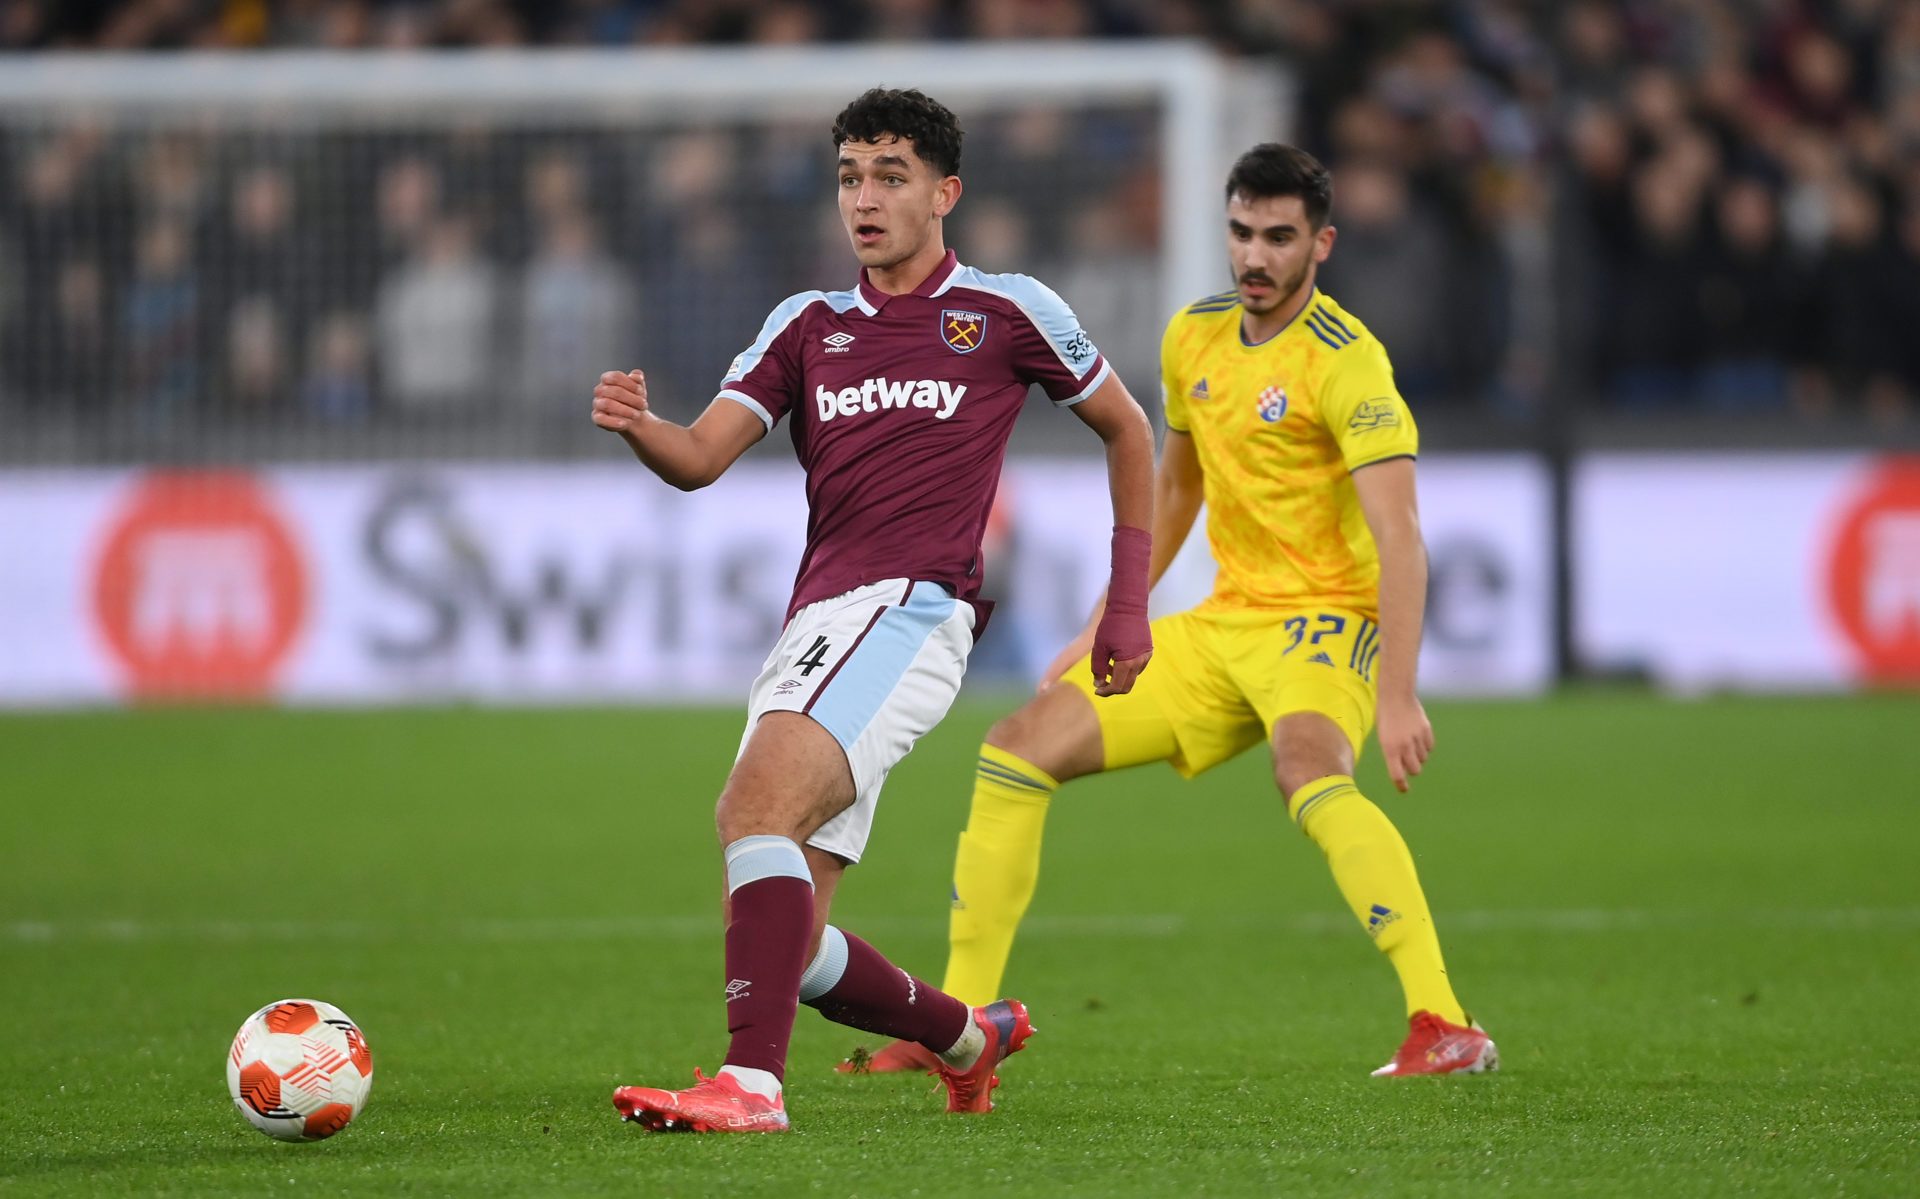 Perkins to leave West Ham